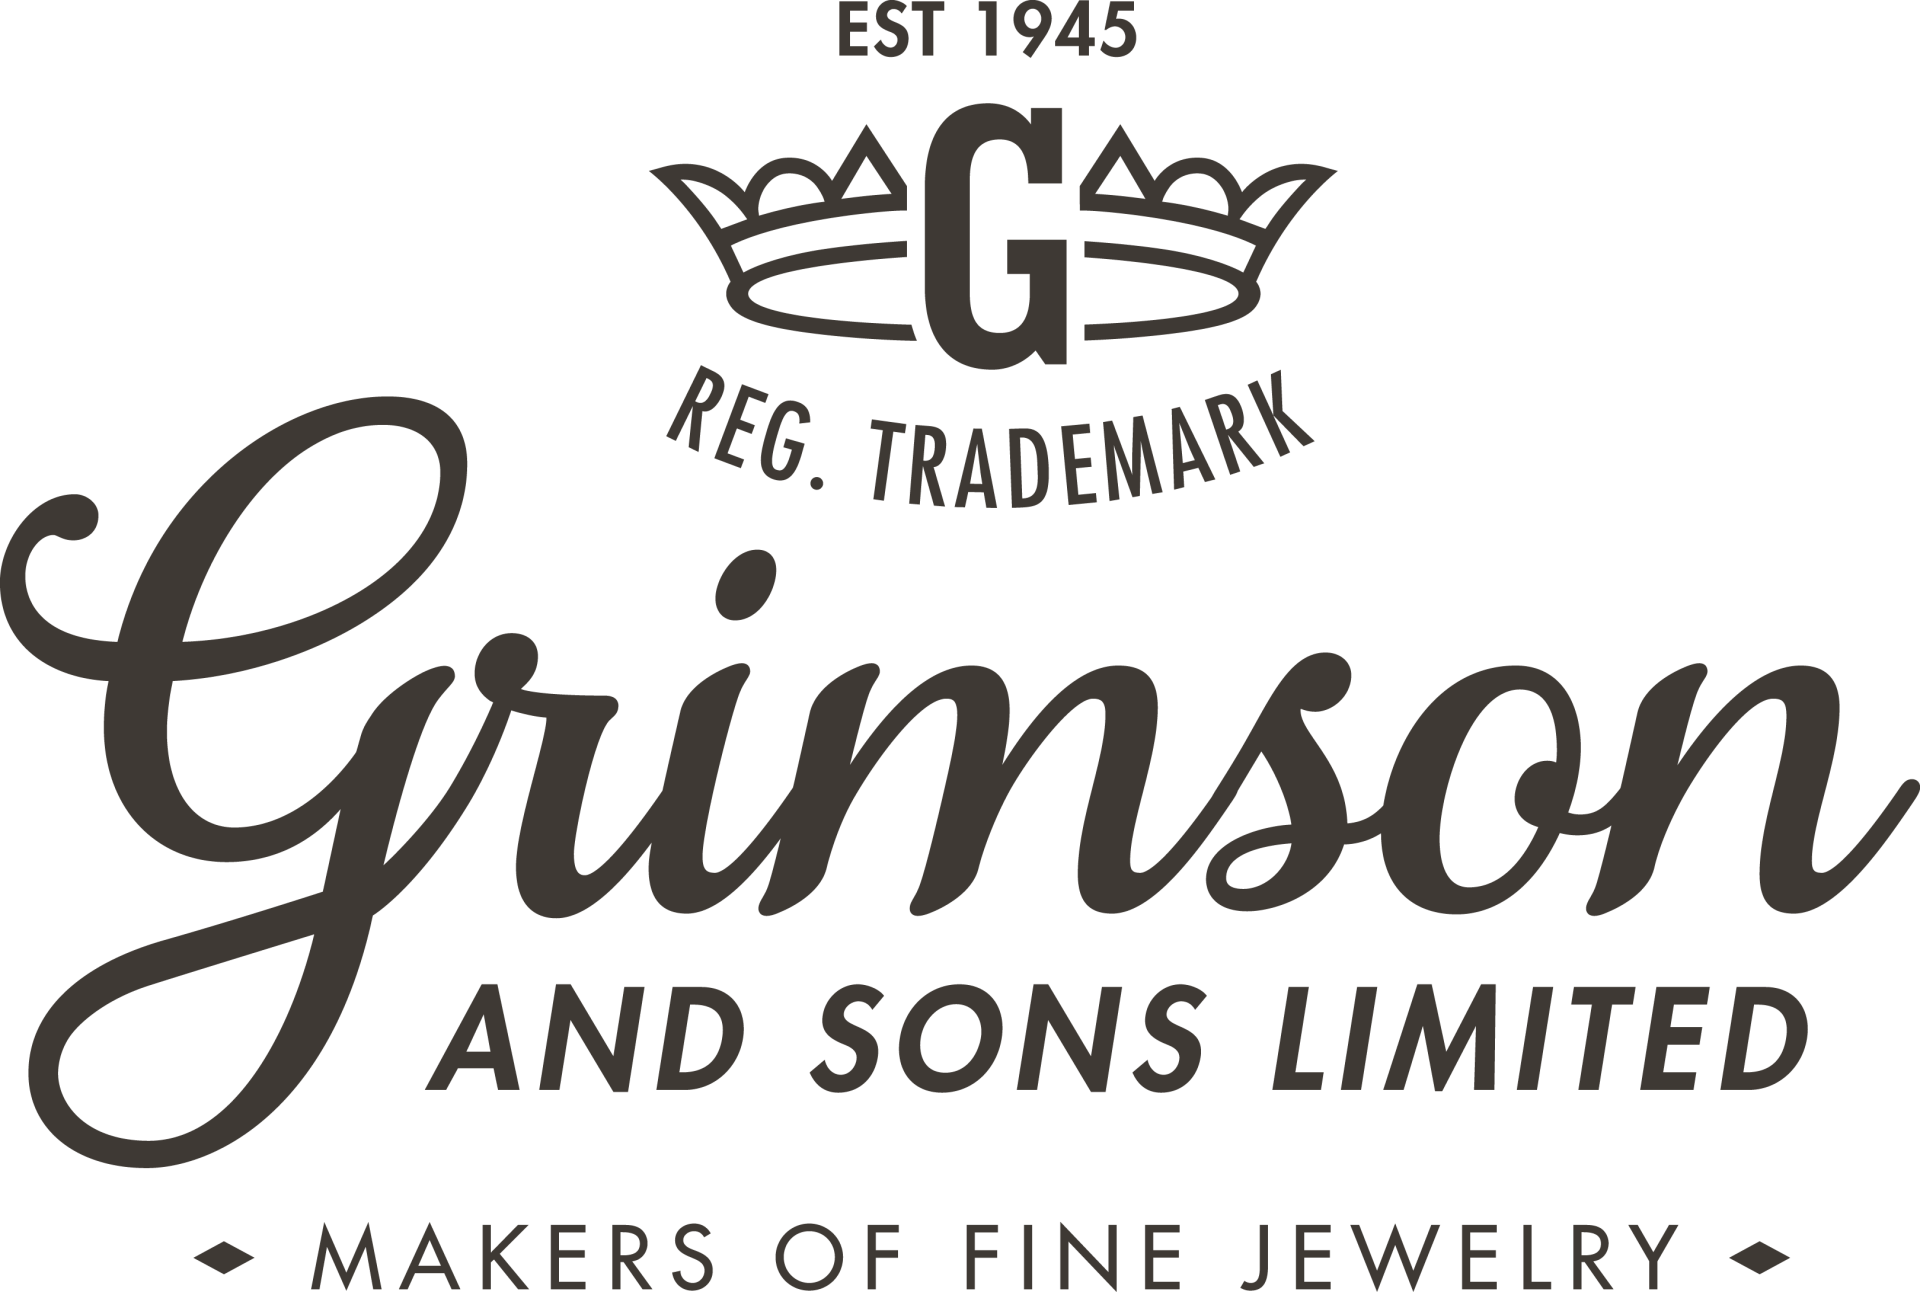 Grimson and Sons Ltd.
Makers of Fine Jewelry